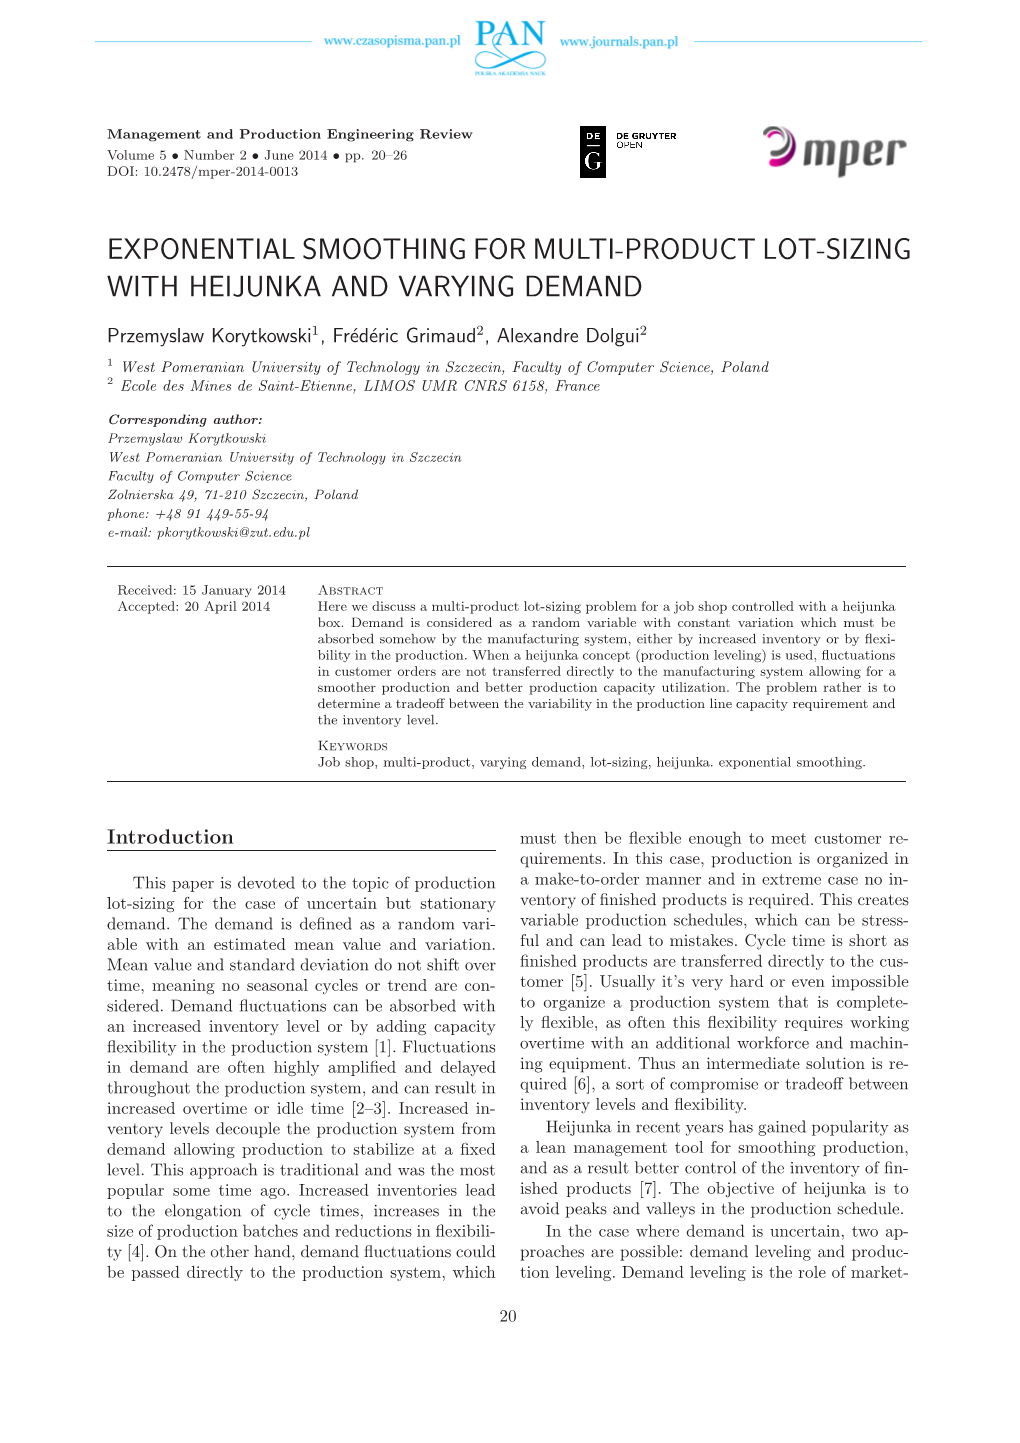 Exponential Smoothing for Multi-Product Lot-Sizing with Heijunka and Varying Demand